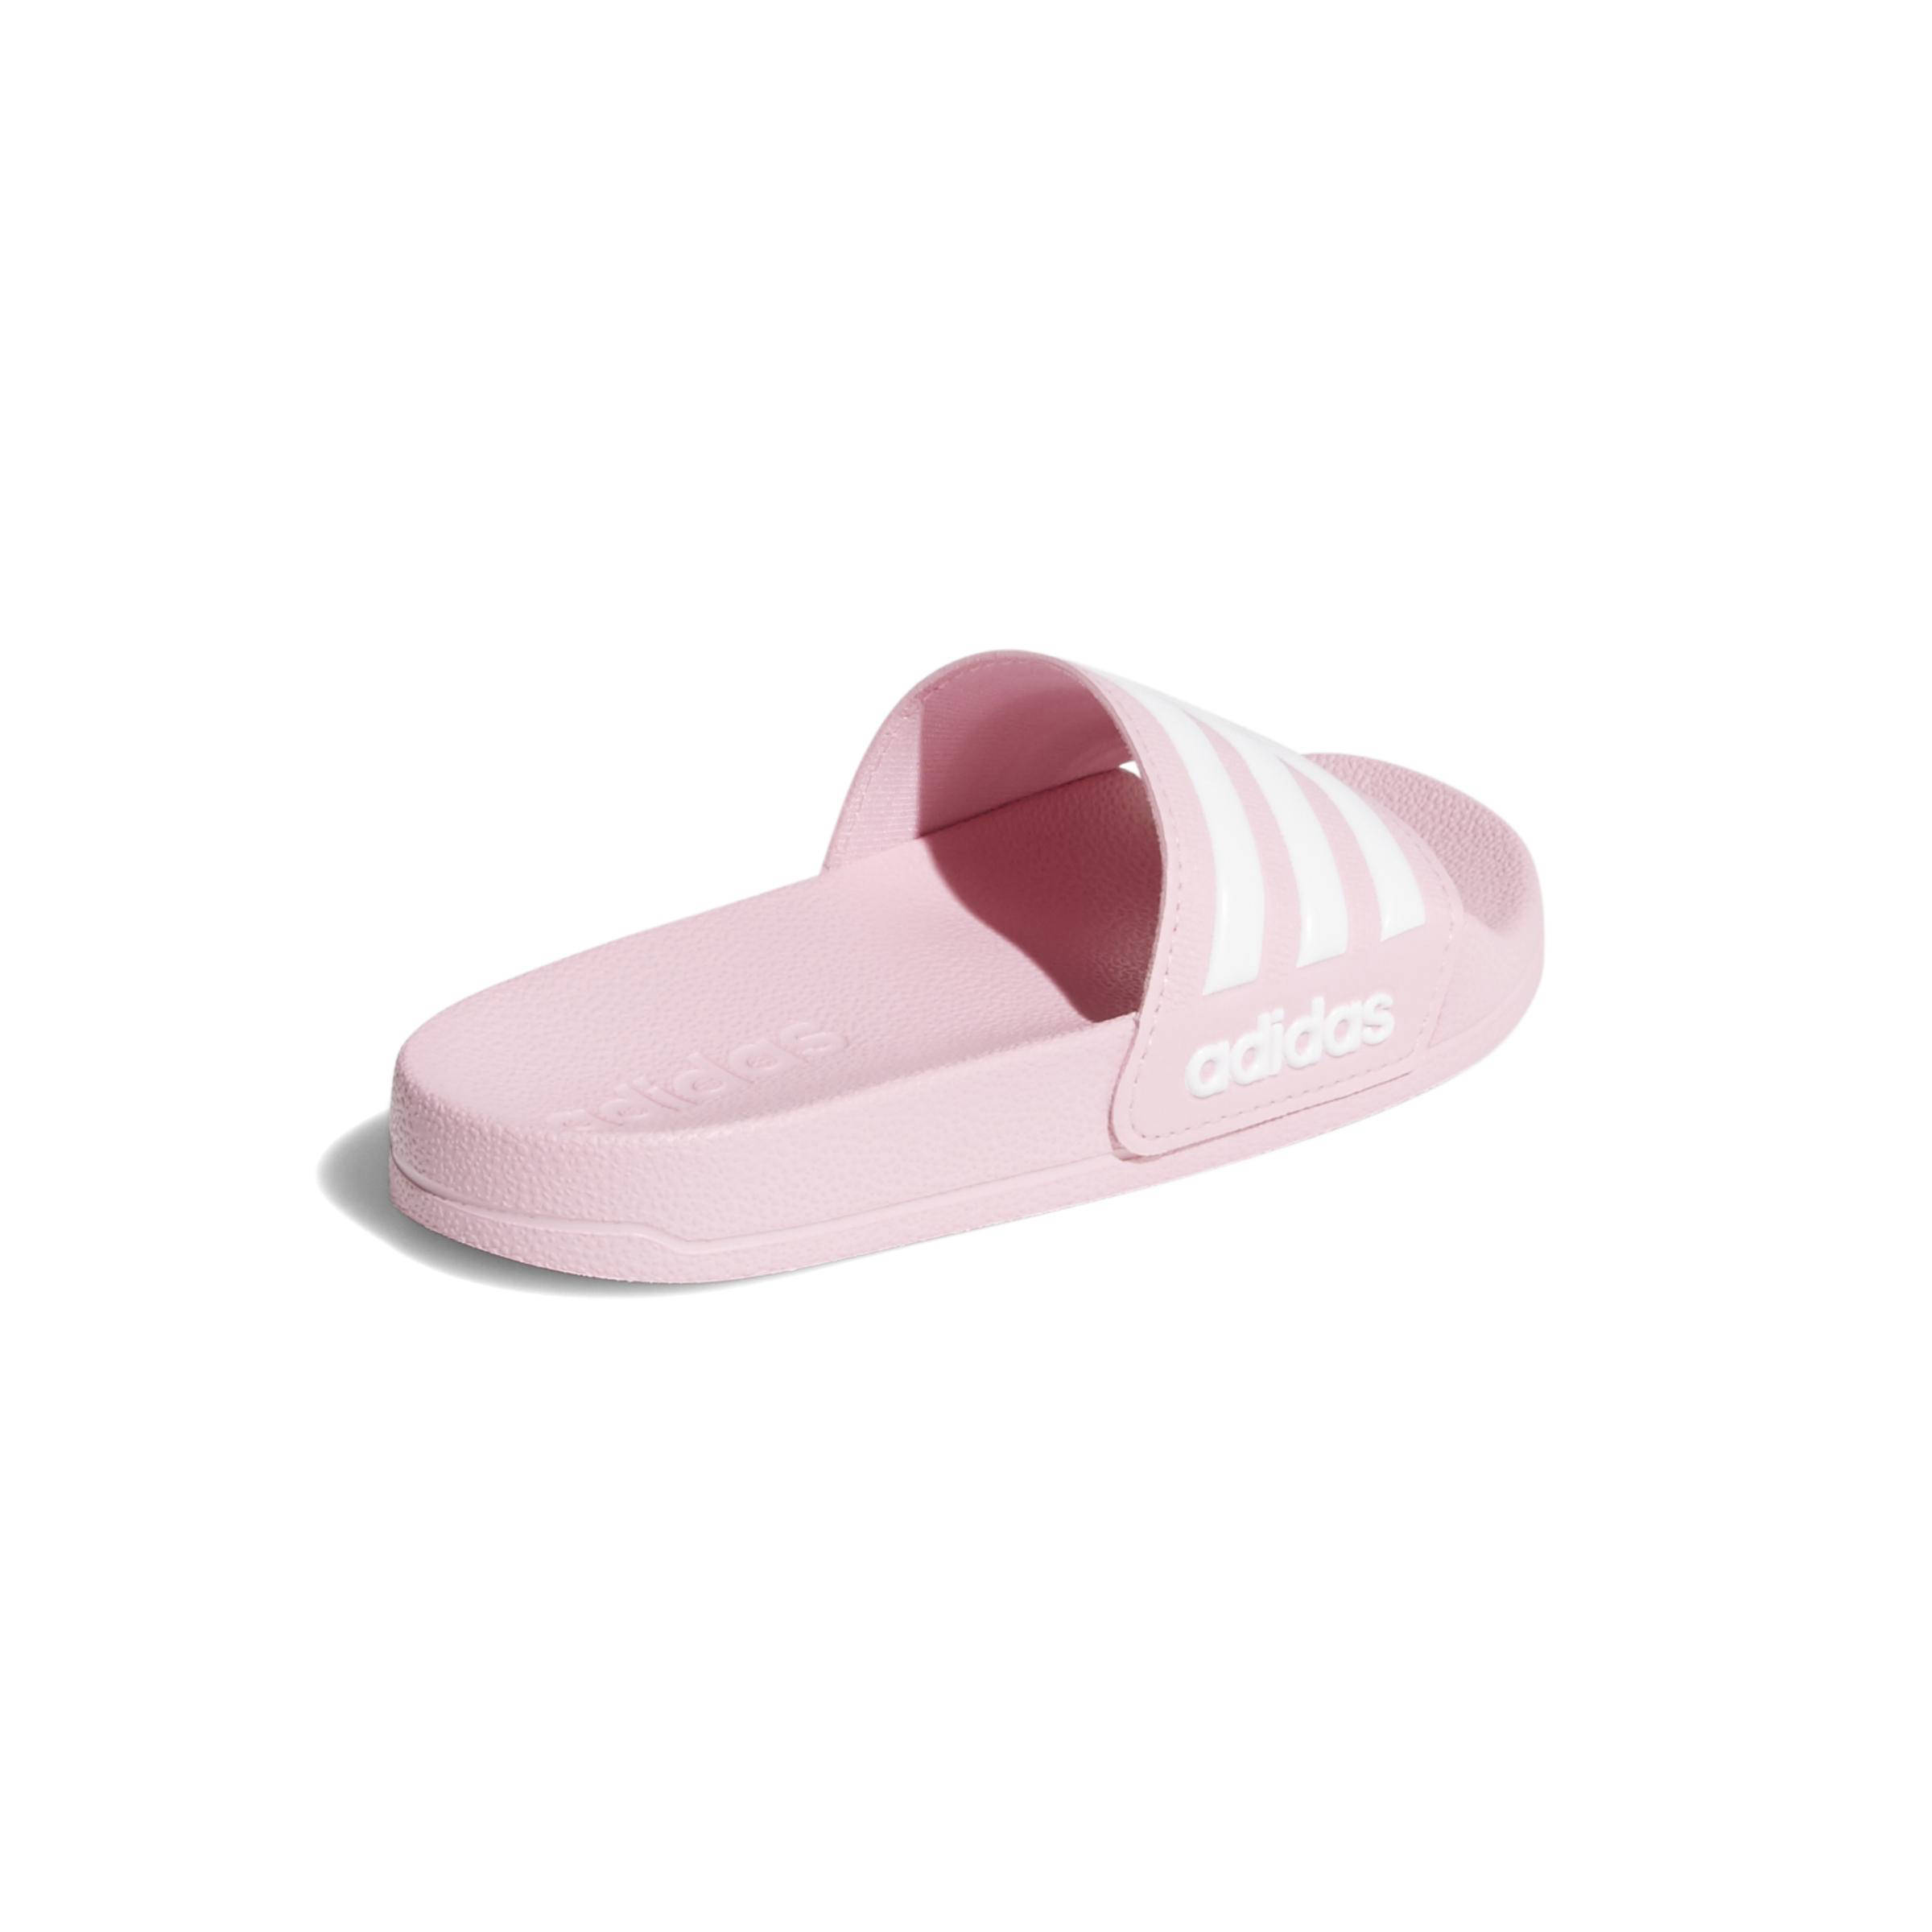 adidas slippers baby roze cheap online